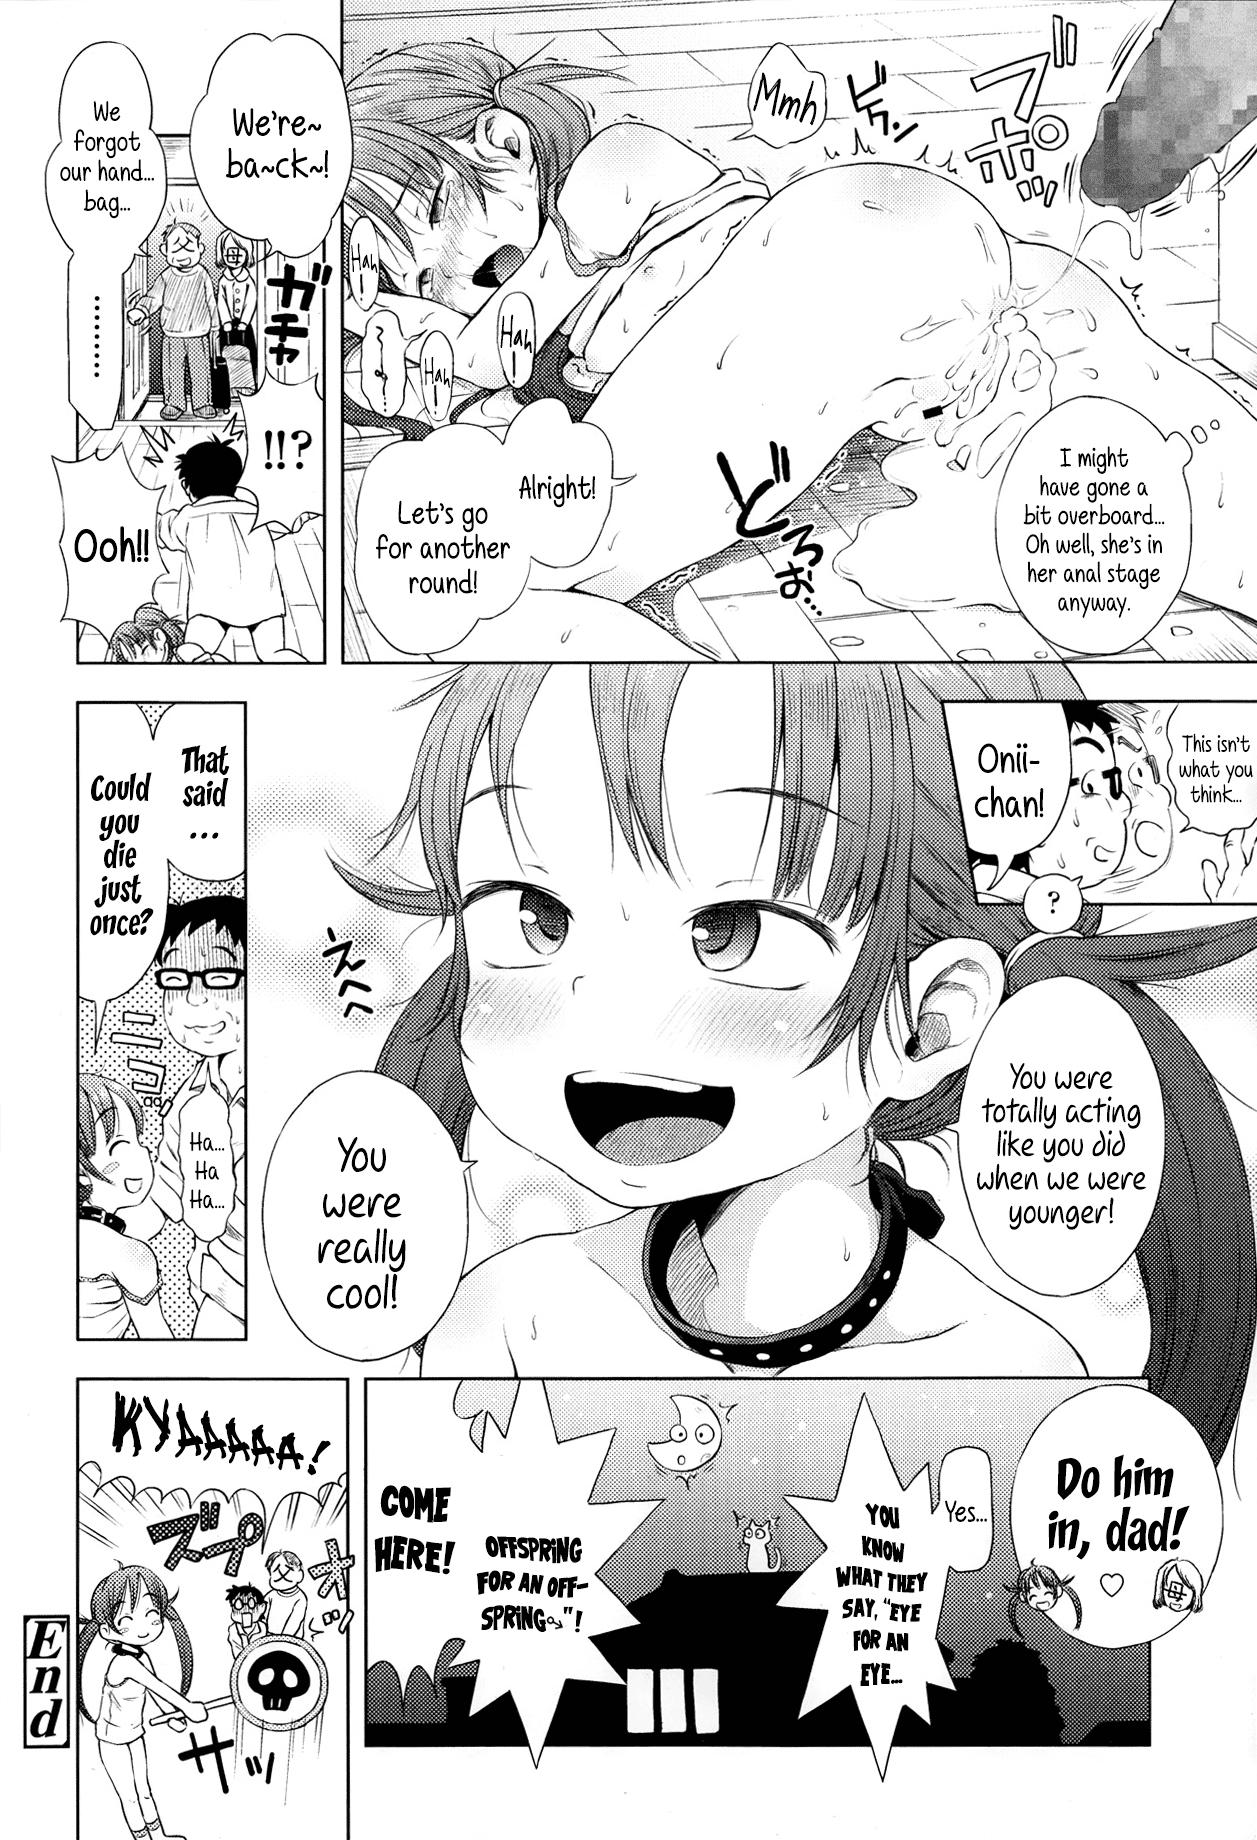 Bare Imouto wa Ko-monki!? | My Little Sister's In Her Anal Stage?! Eurobabe - Page 24